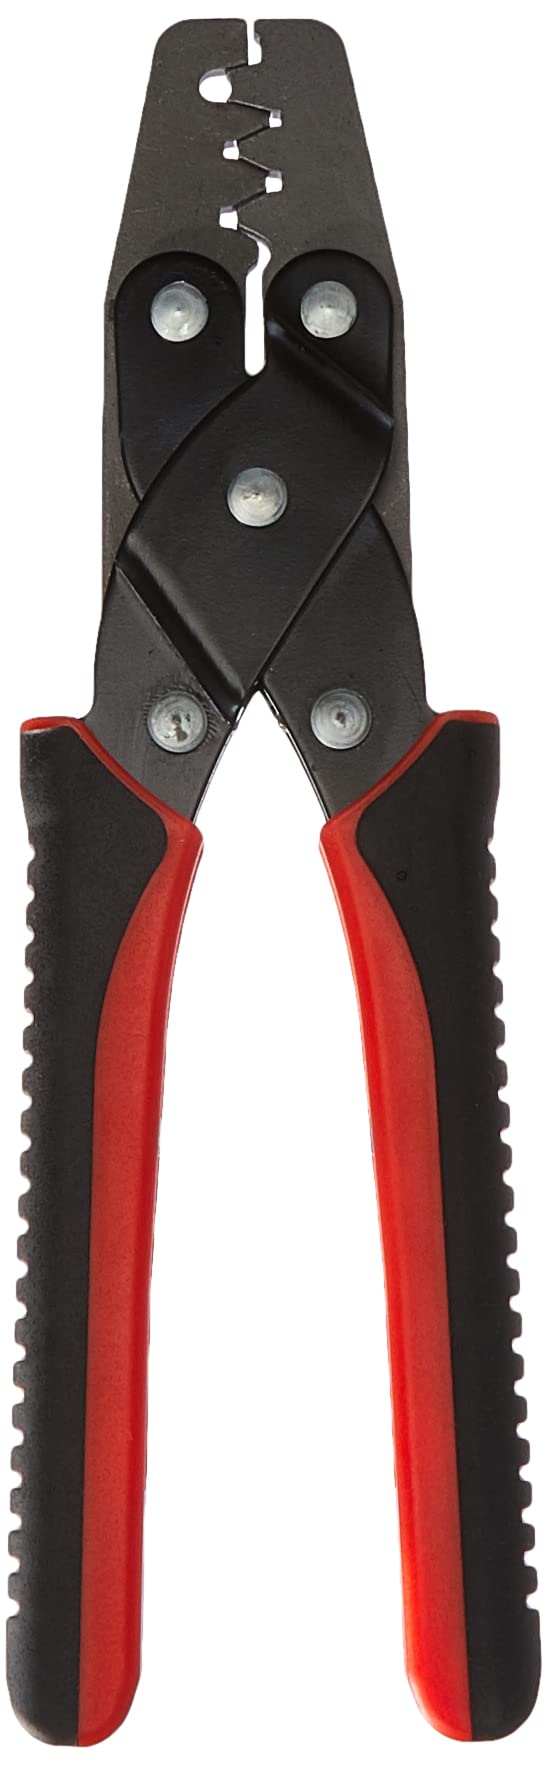 Sealey Tool - Superseal Series 1.5, AK3859, Red von Sealey